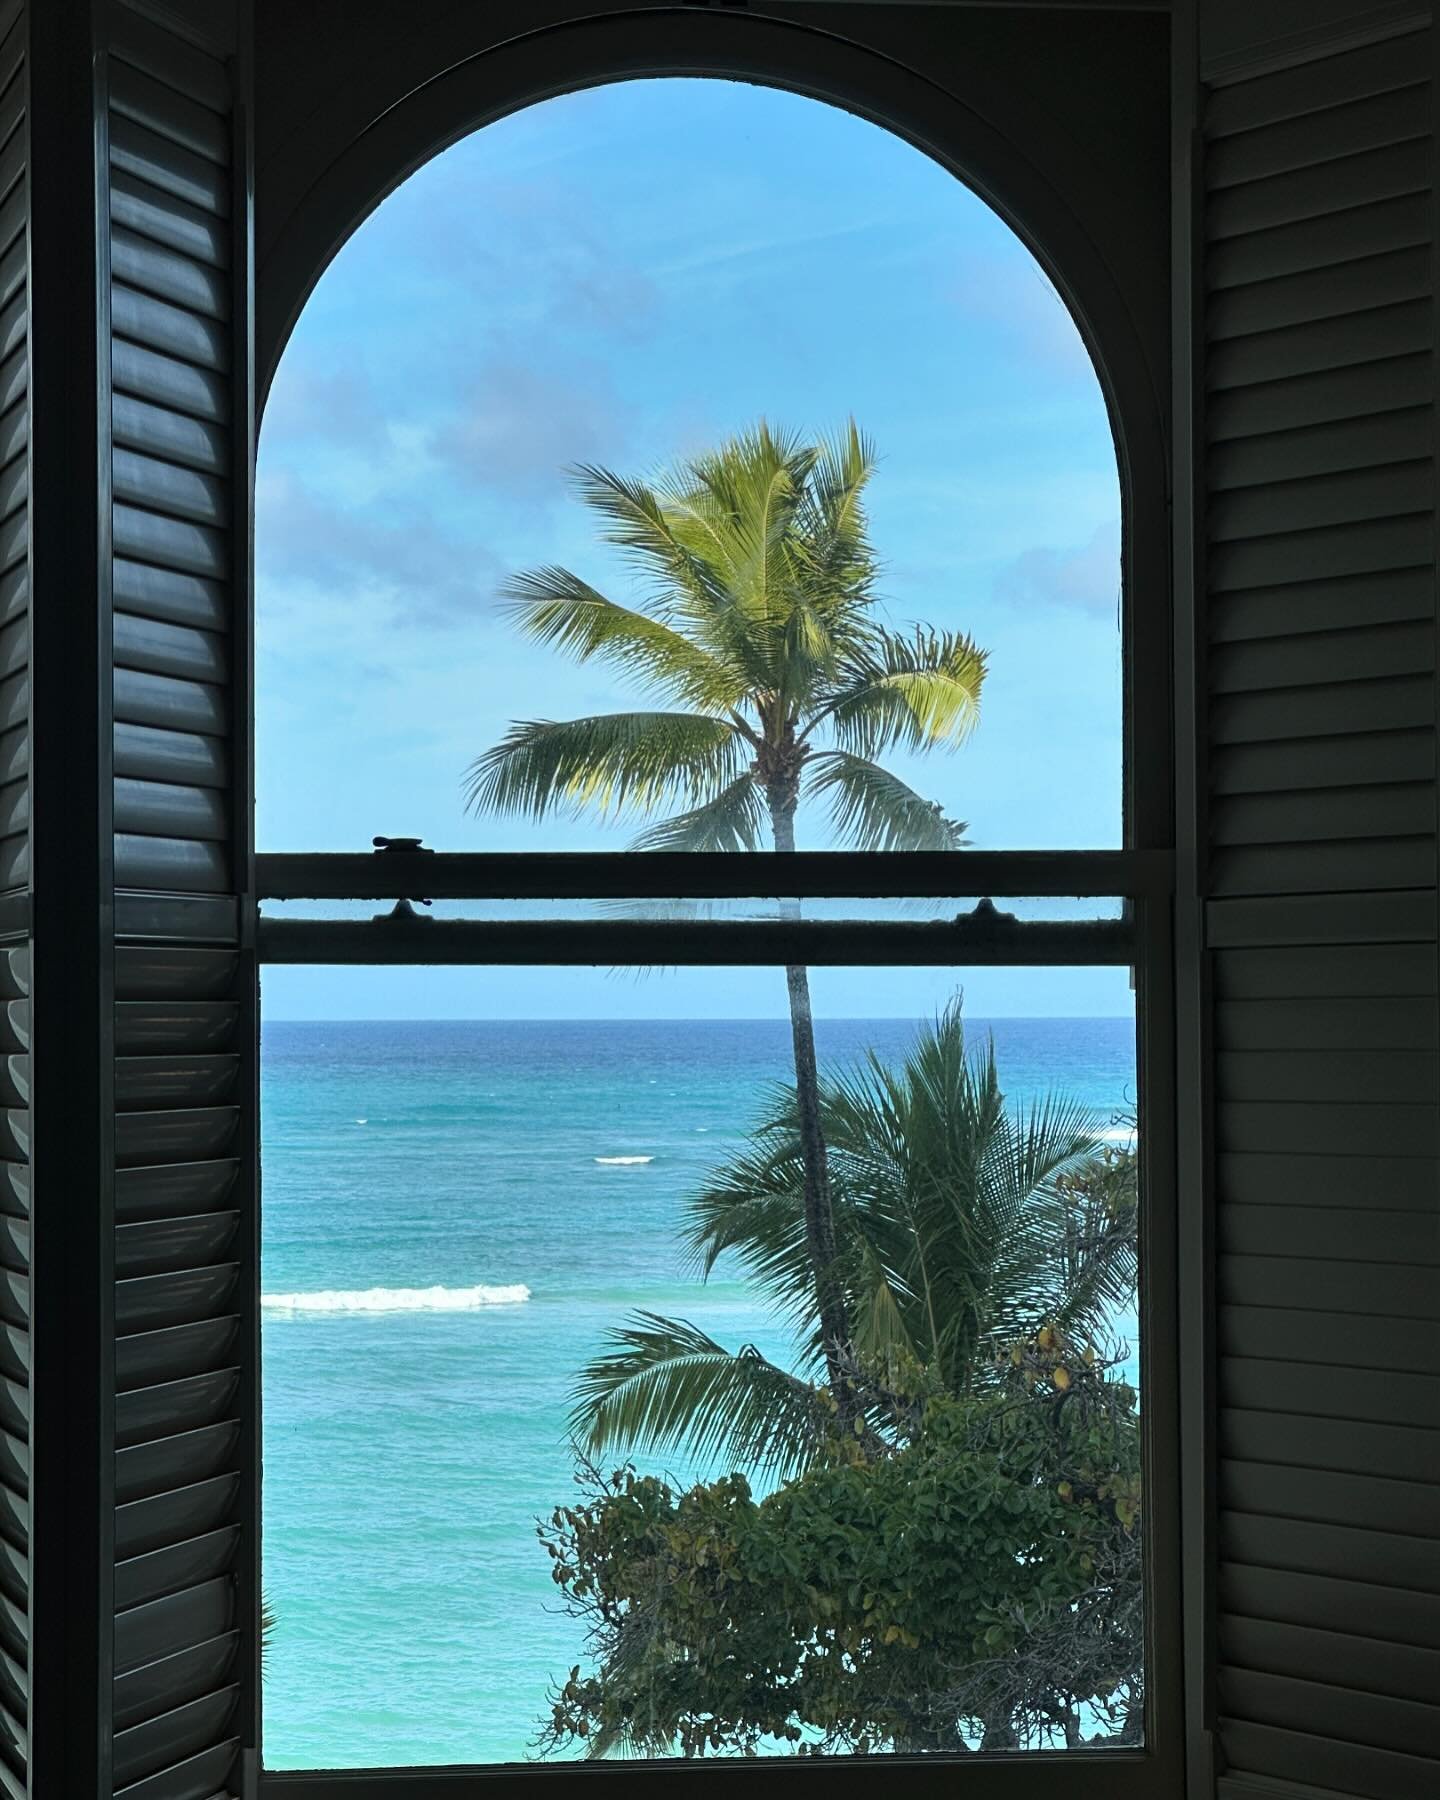 I had so much fun tagging along on my husband&rsquo;s work trip to Honolulu! I got to do yoga and meditation @themoanasurfrider hotel with the lovely Jen @seaofheartyoga to the sound of ocean waves, and I found a perfect writing nook to write in afte